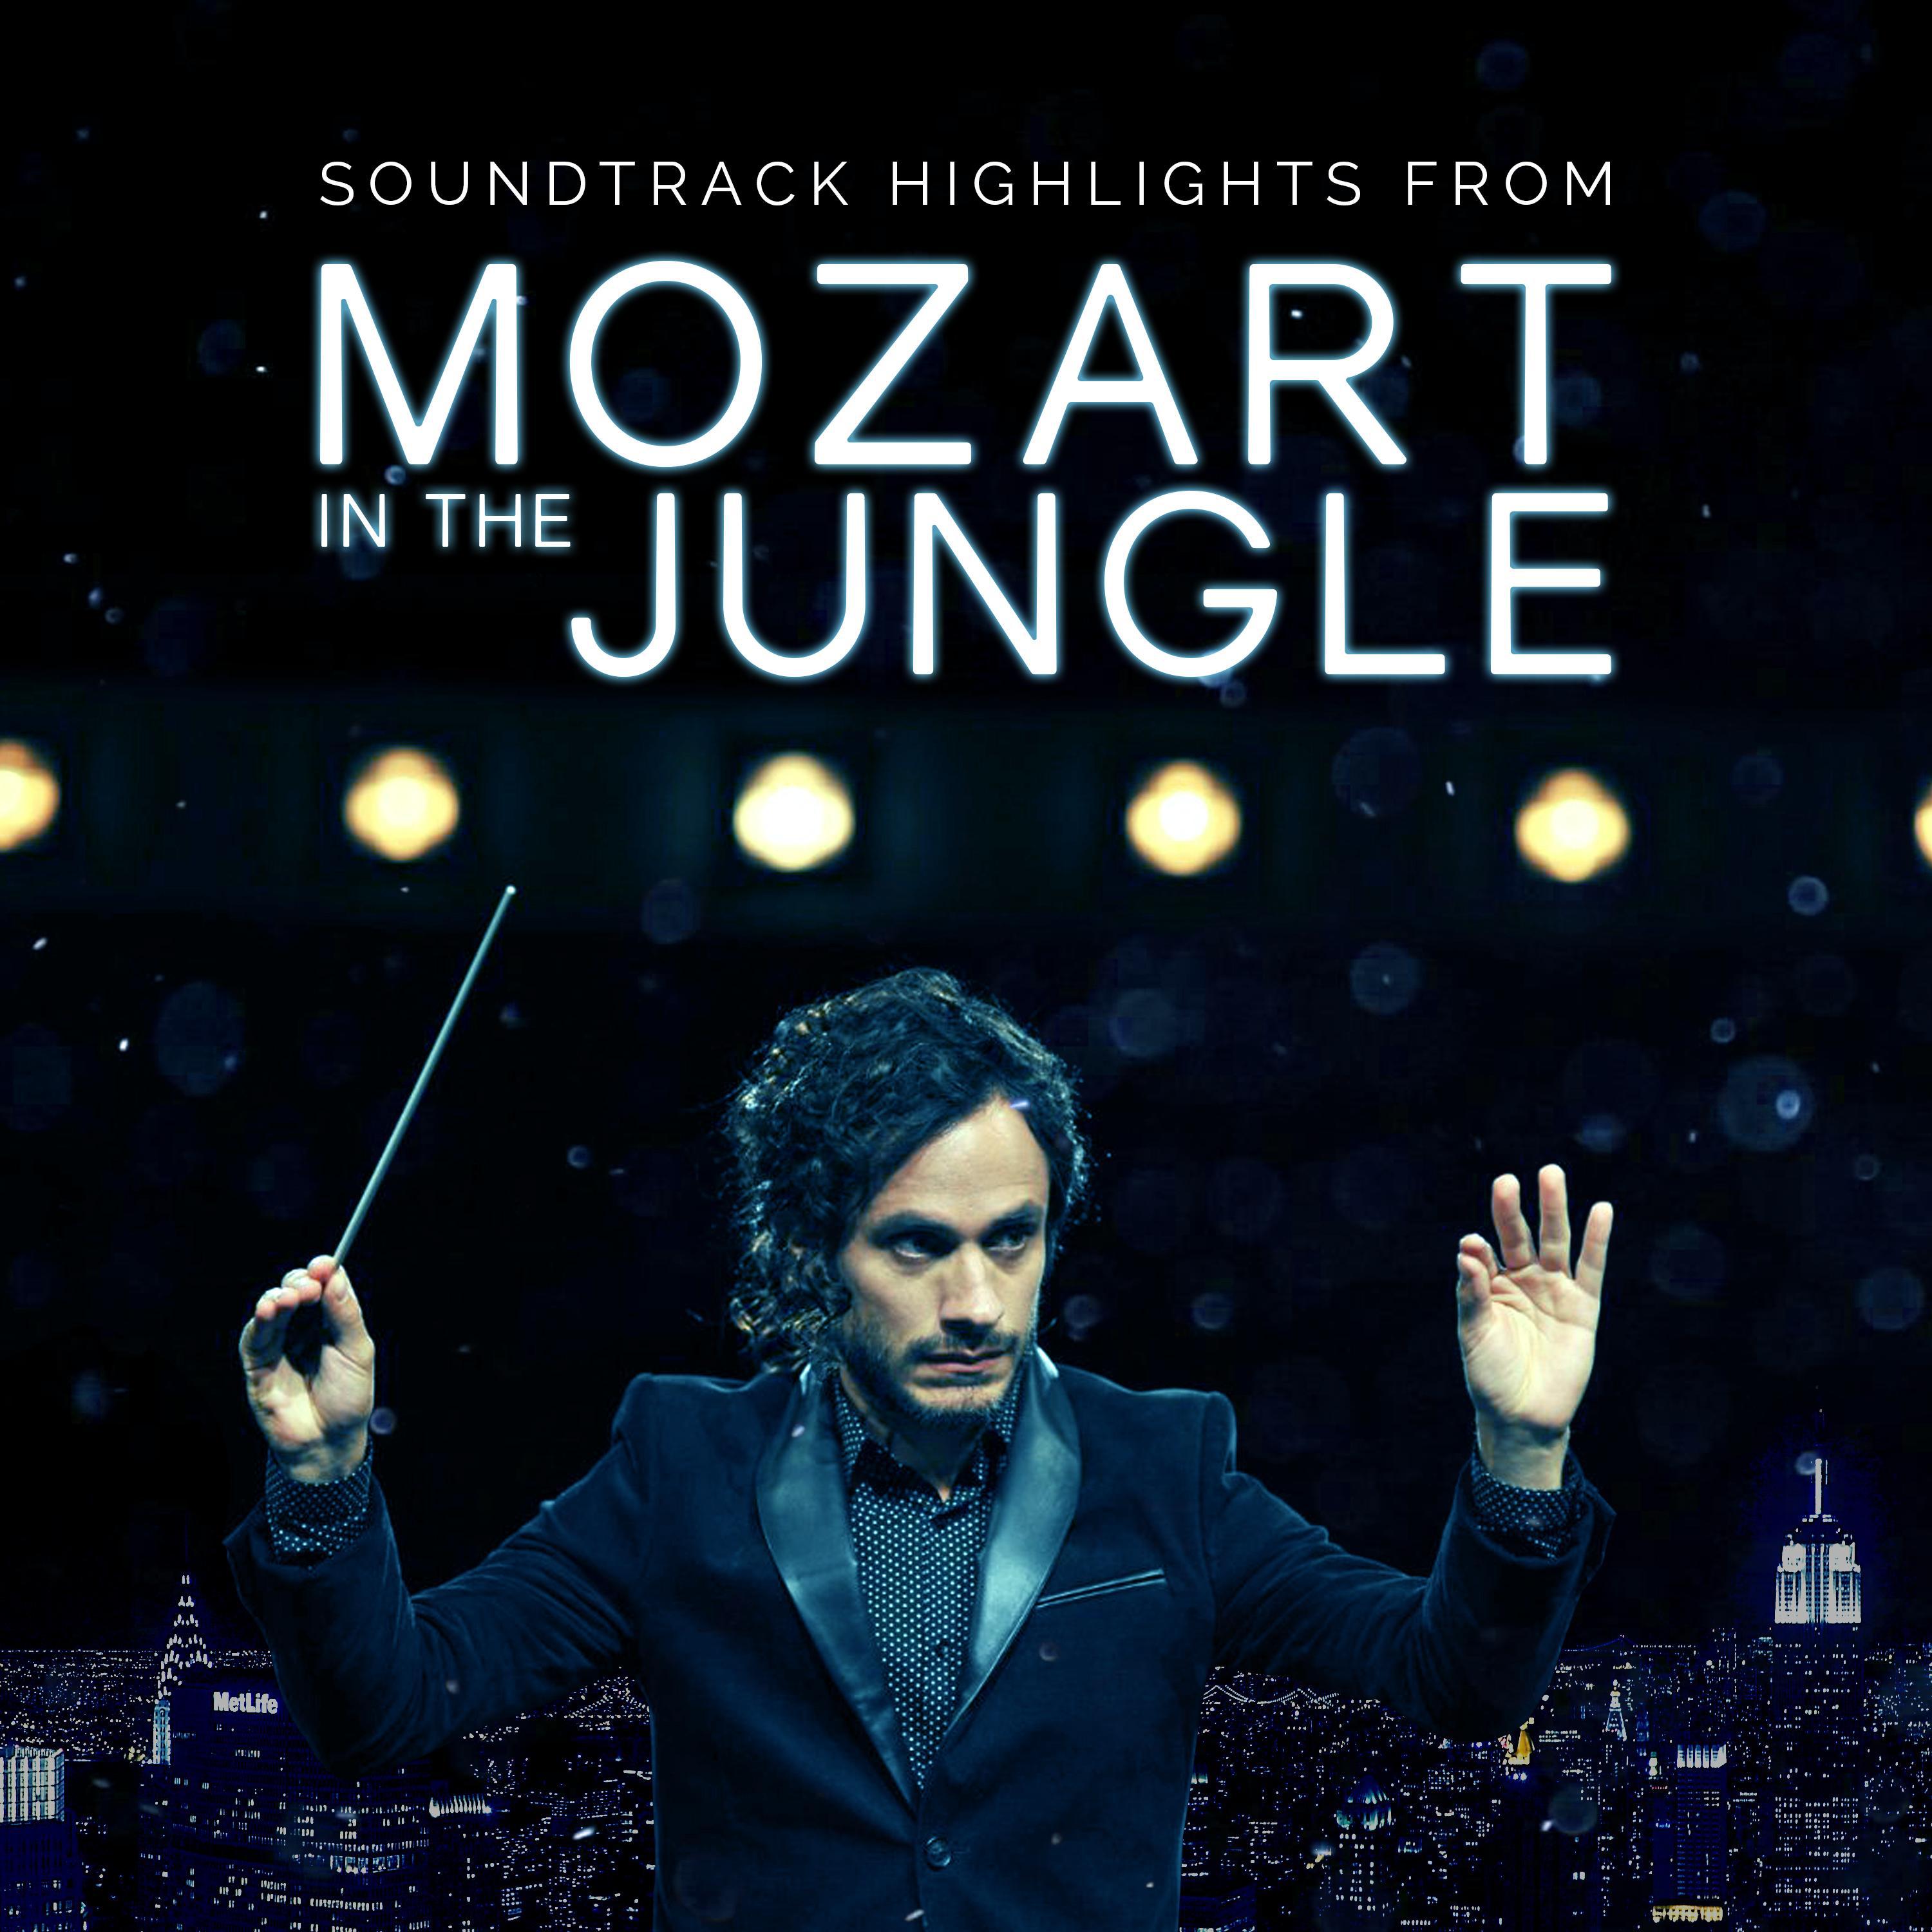 Mozart in the Jungle - Soundtrack Highlights